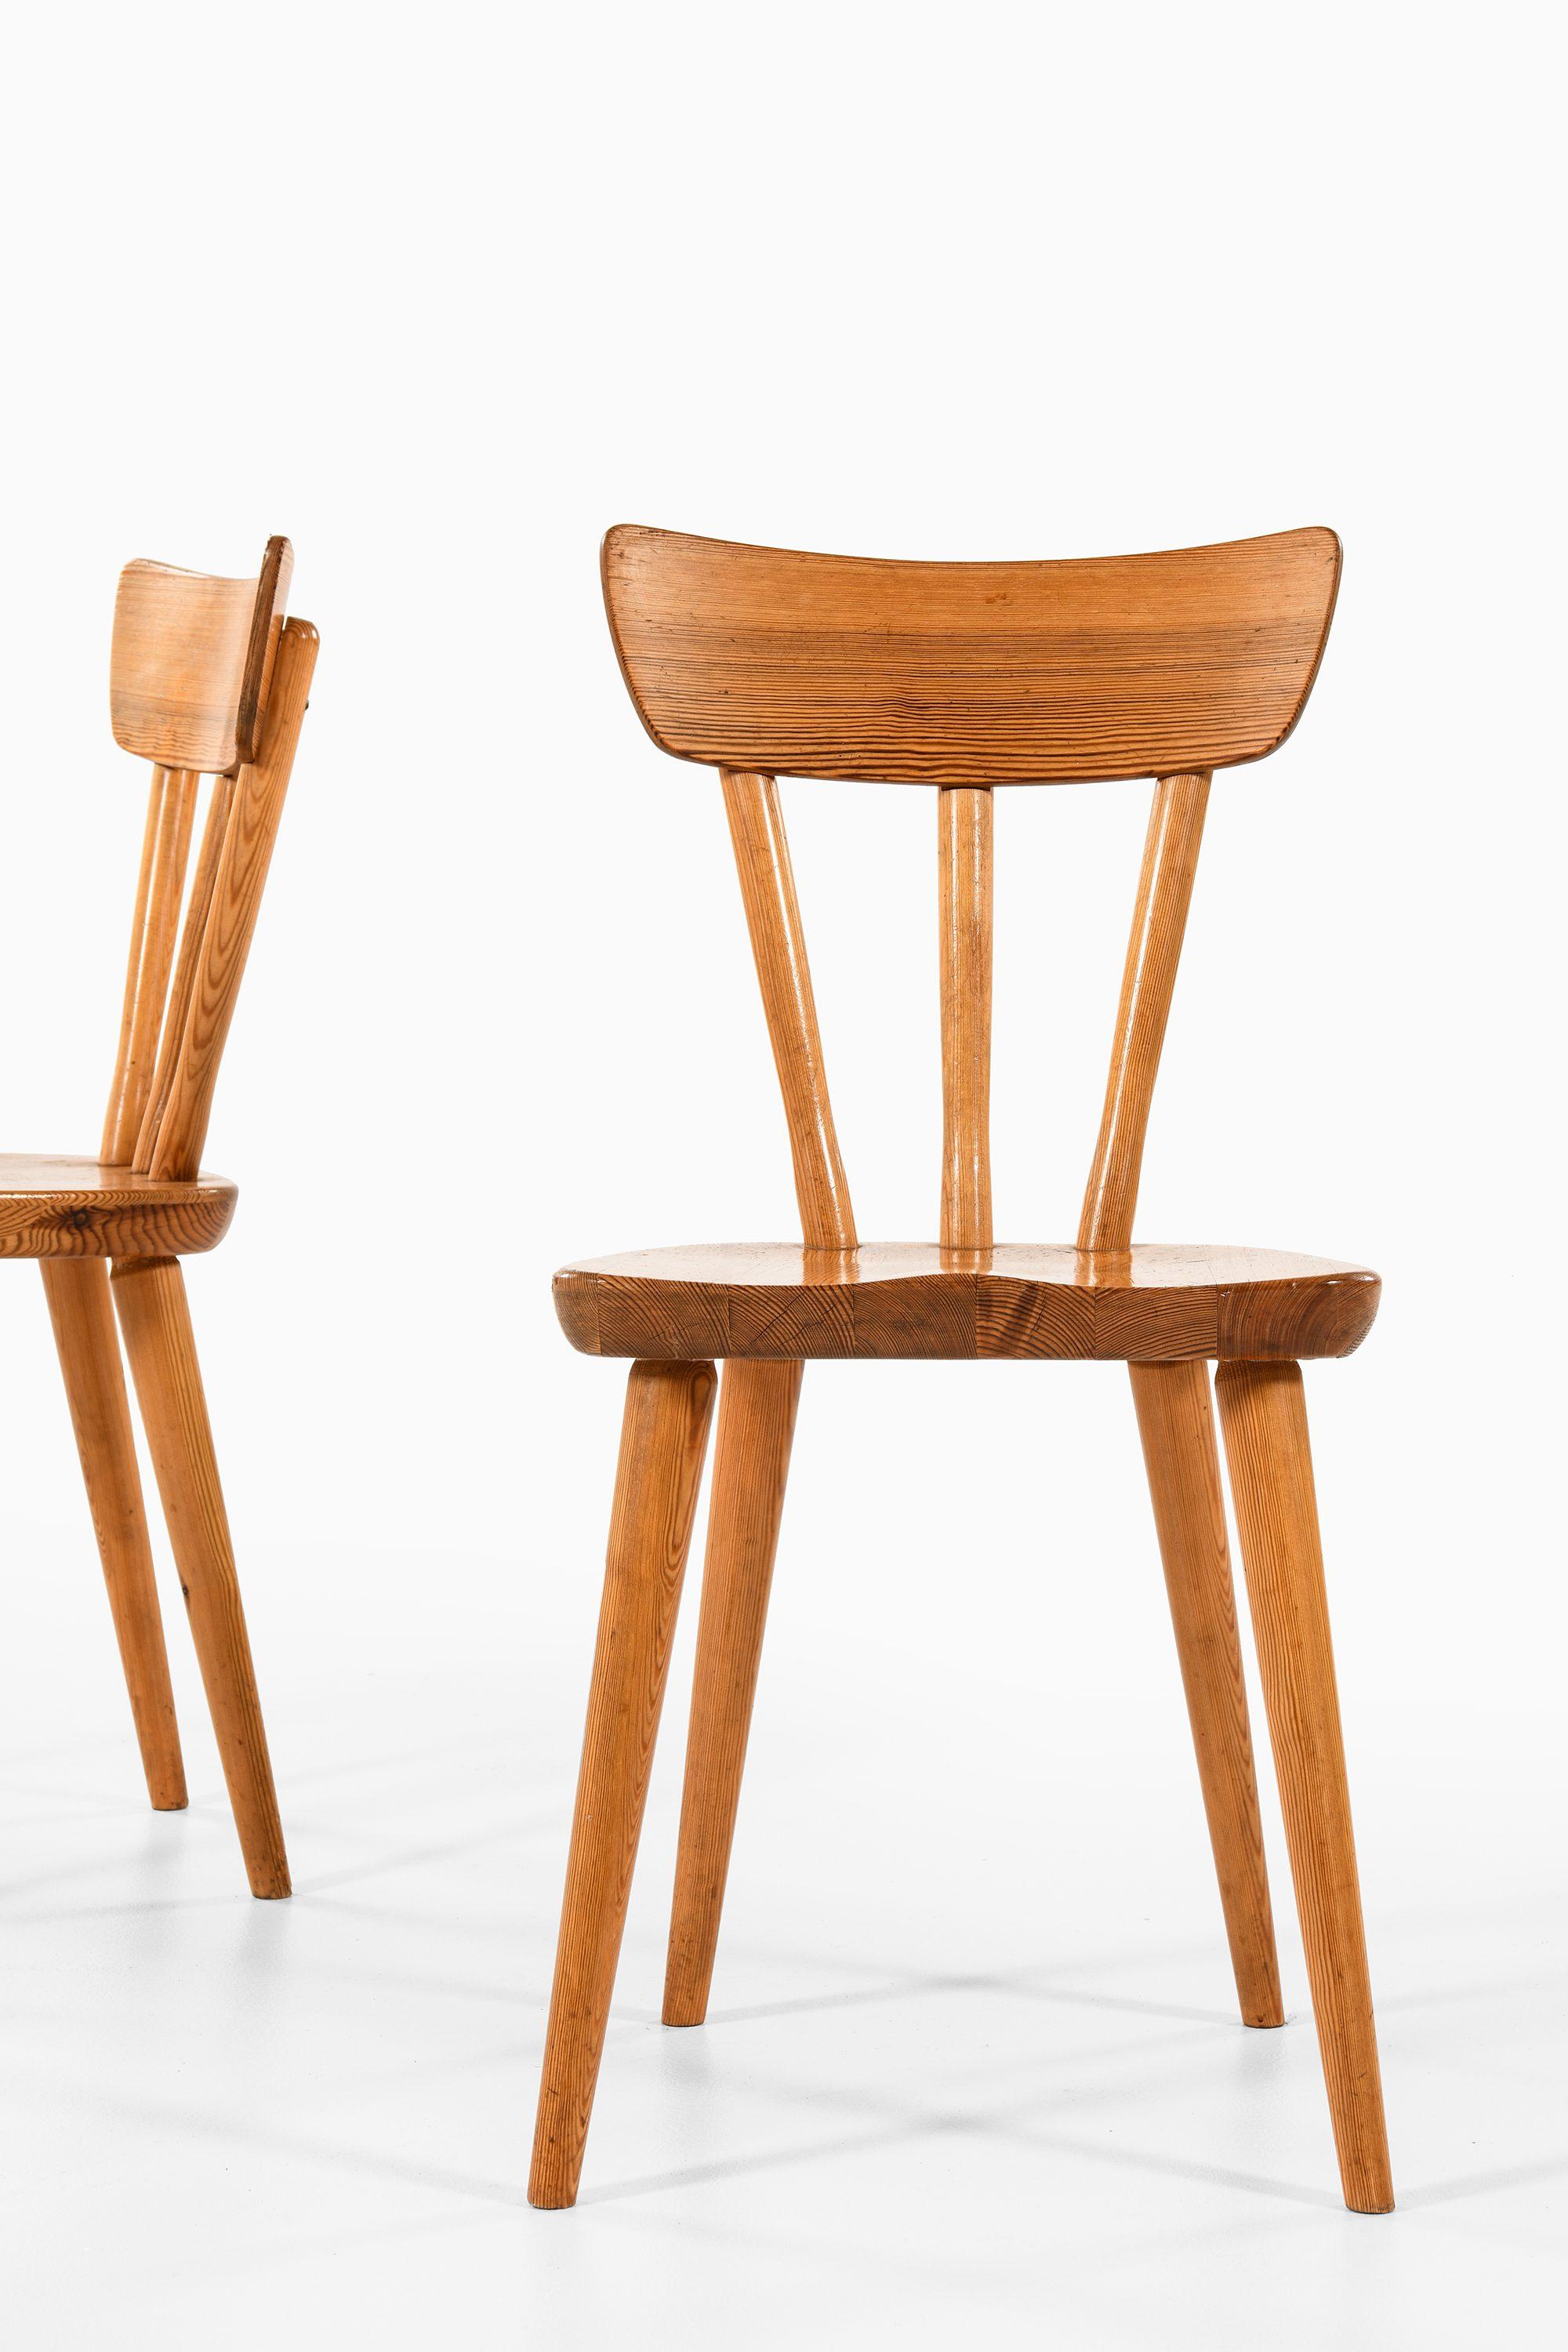 Set of 8 Dining Chairs in Solid Pine by Göran Malmvall, 1940's In Good Condition For Sale In Limhamn, Skåne län